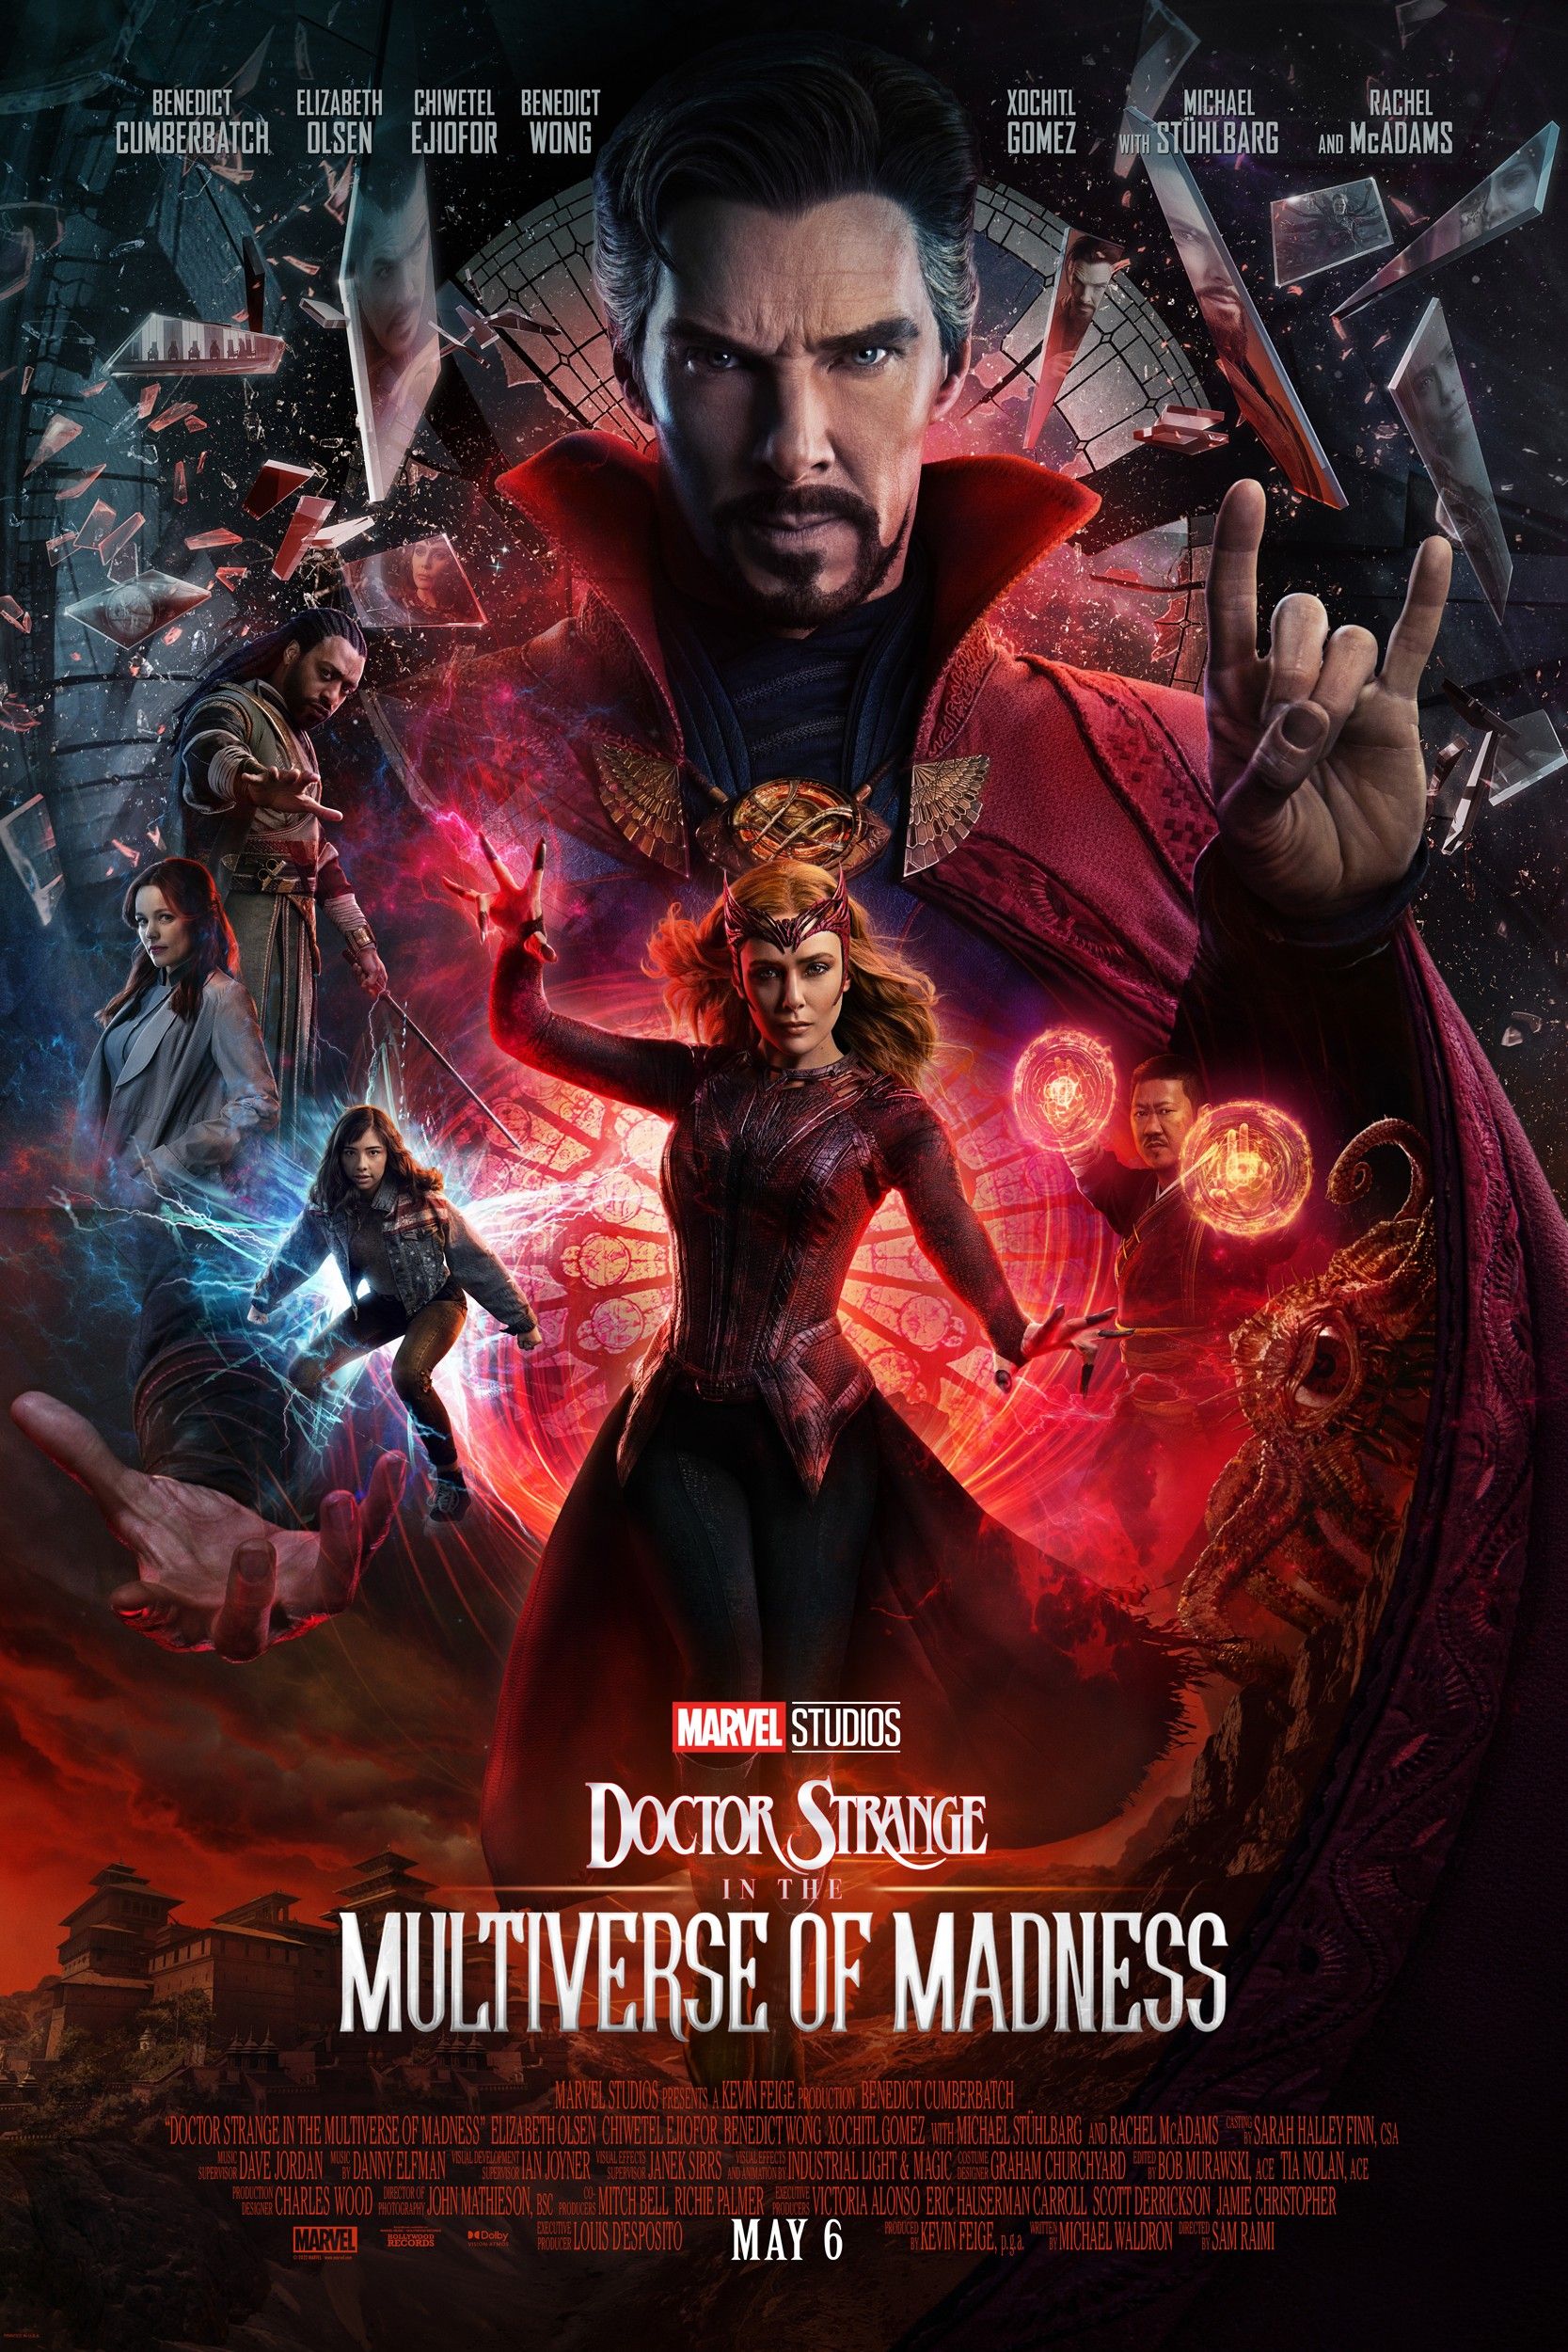 Doctor-Strange-In-the-Multiverse-of-Madness-Poster-1